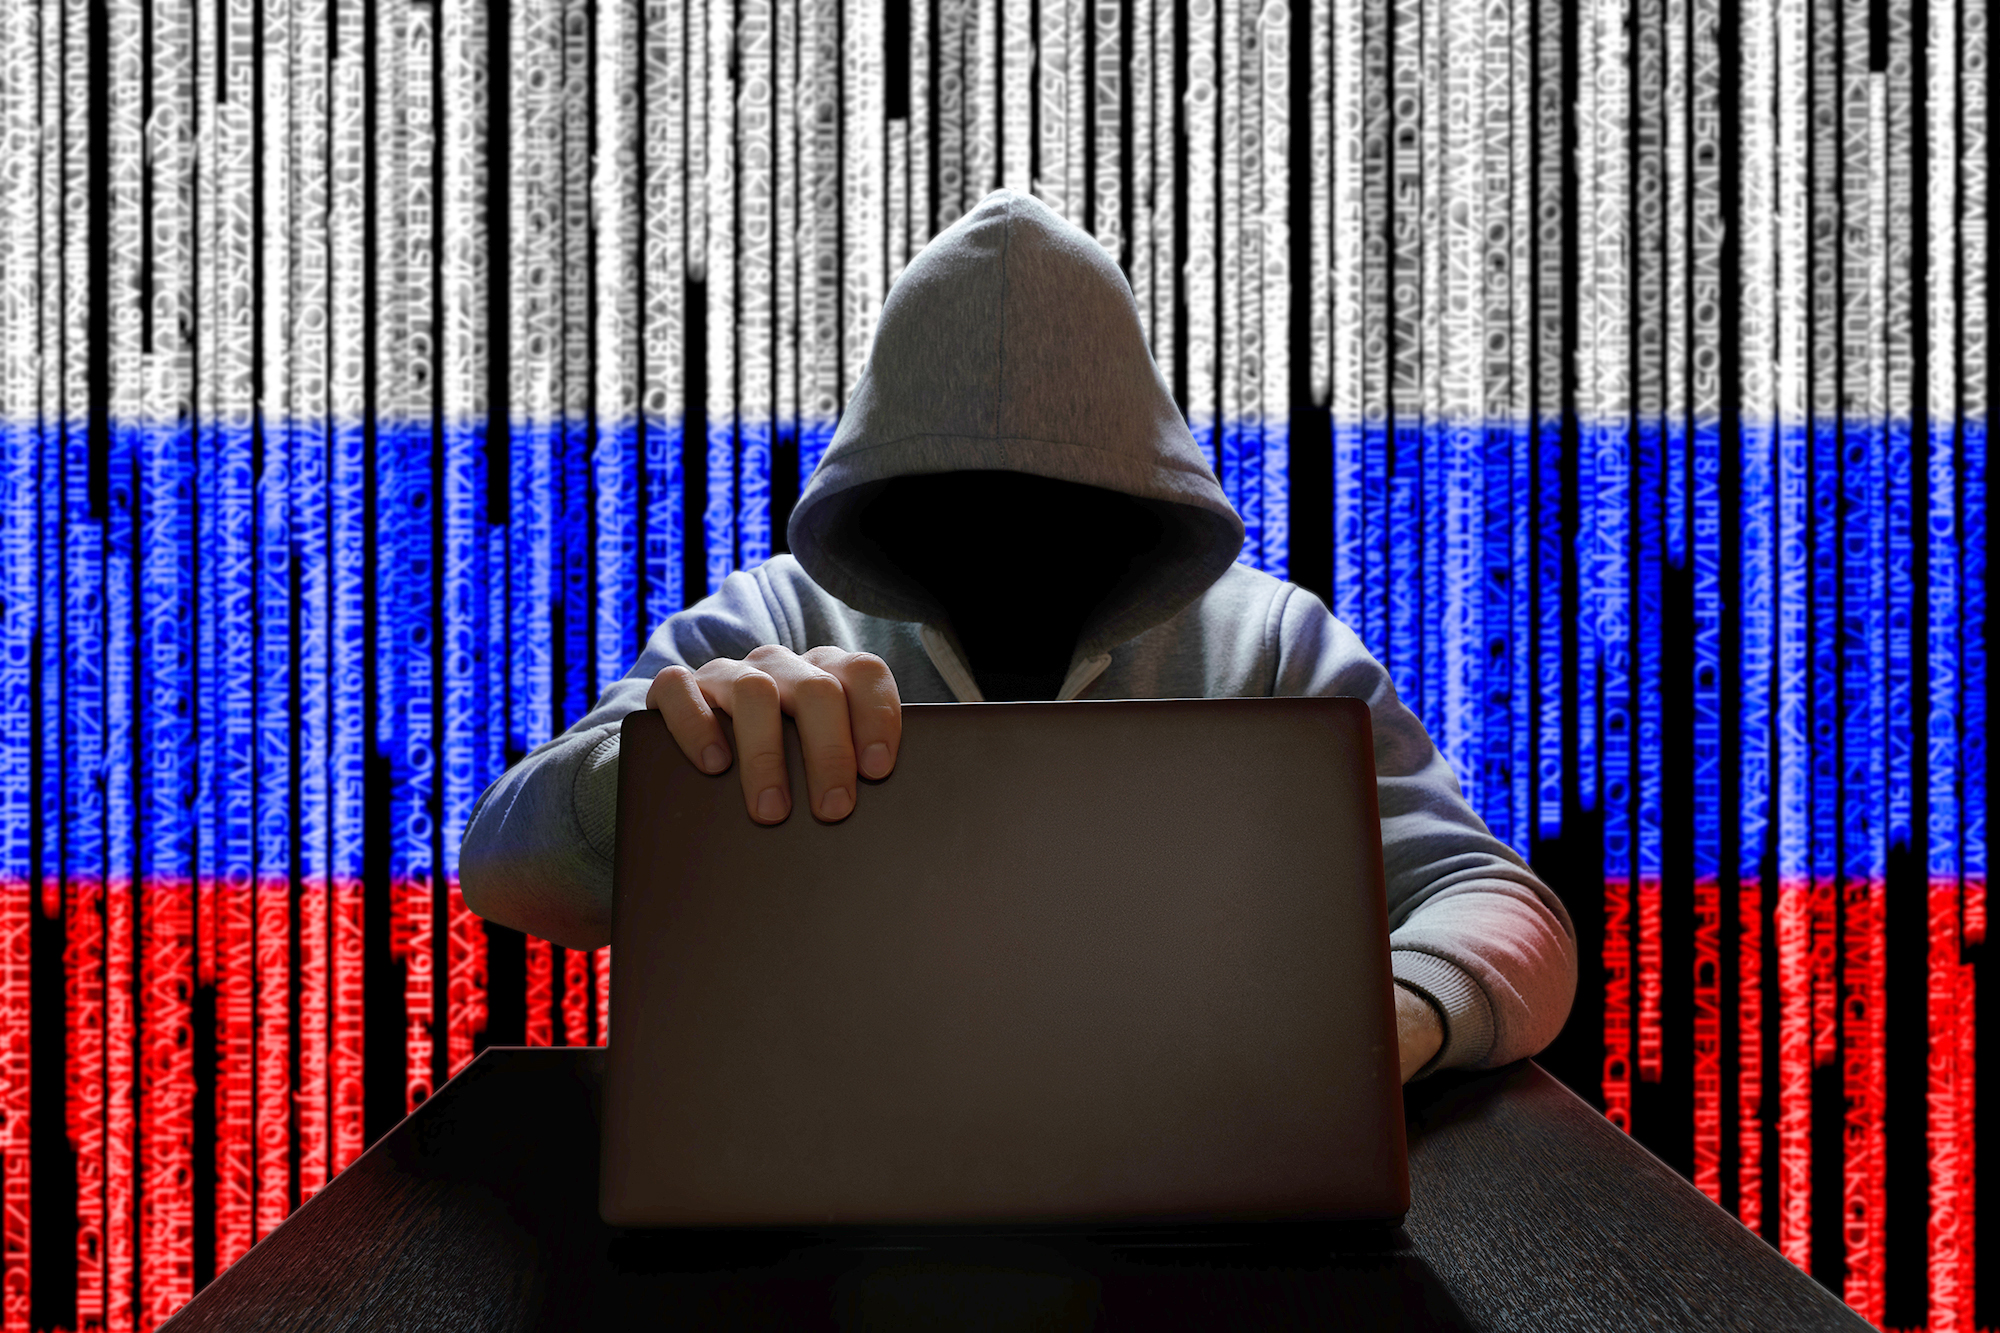 PHOTO: A hooded figure works on a laptop with a Russian Flag digital code backdrop in an undated stock image.